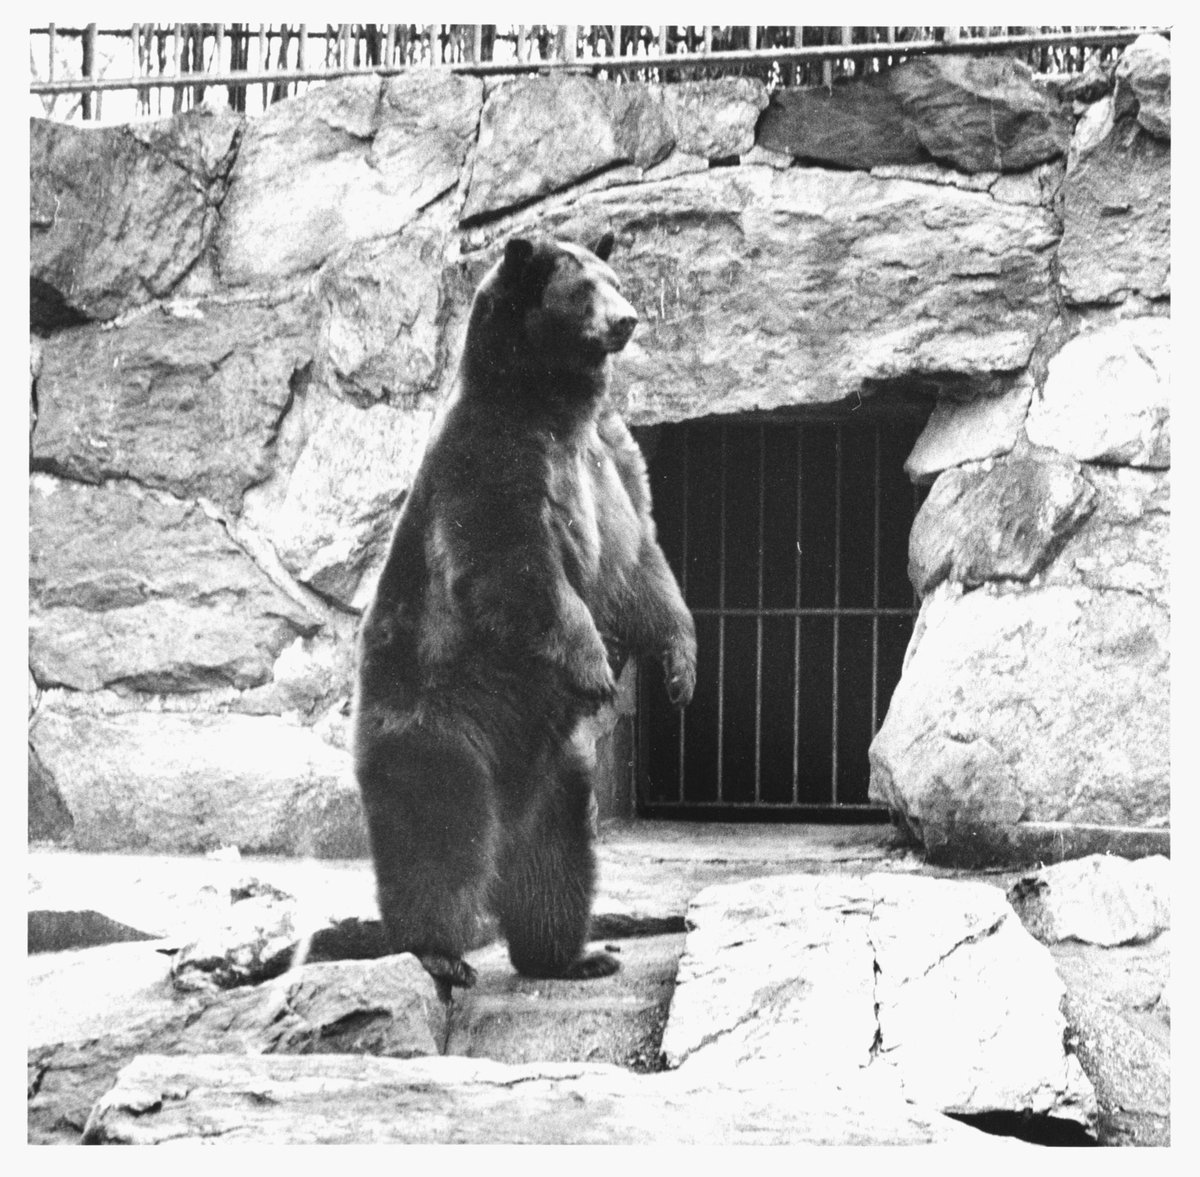 #DidYouKnow I had a living symbol?! In 1950, a lone bear cub survived a human-caused wildfire in the Capitan Mountains of New Mexico. His paws and hind legs were so badly burned, they initially named him Hot Foot Teddy.